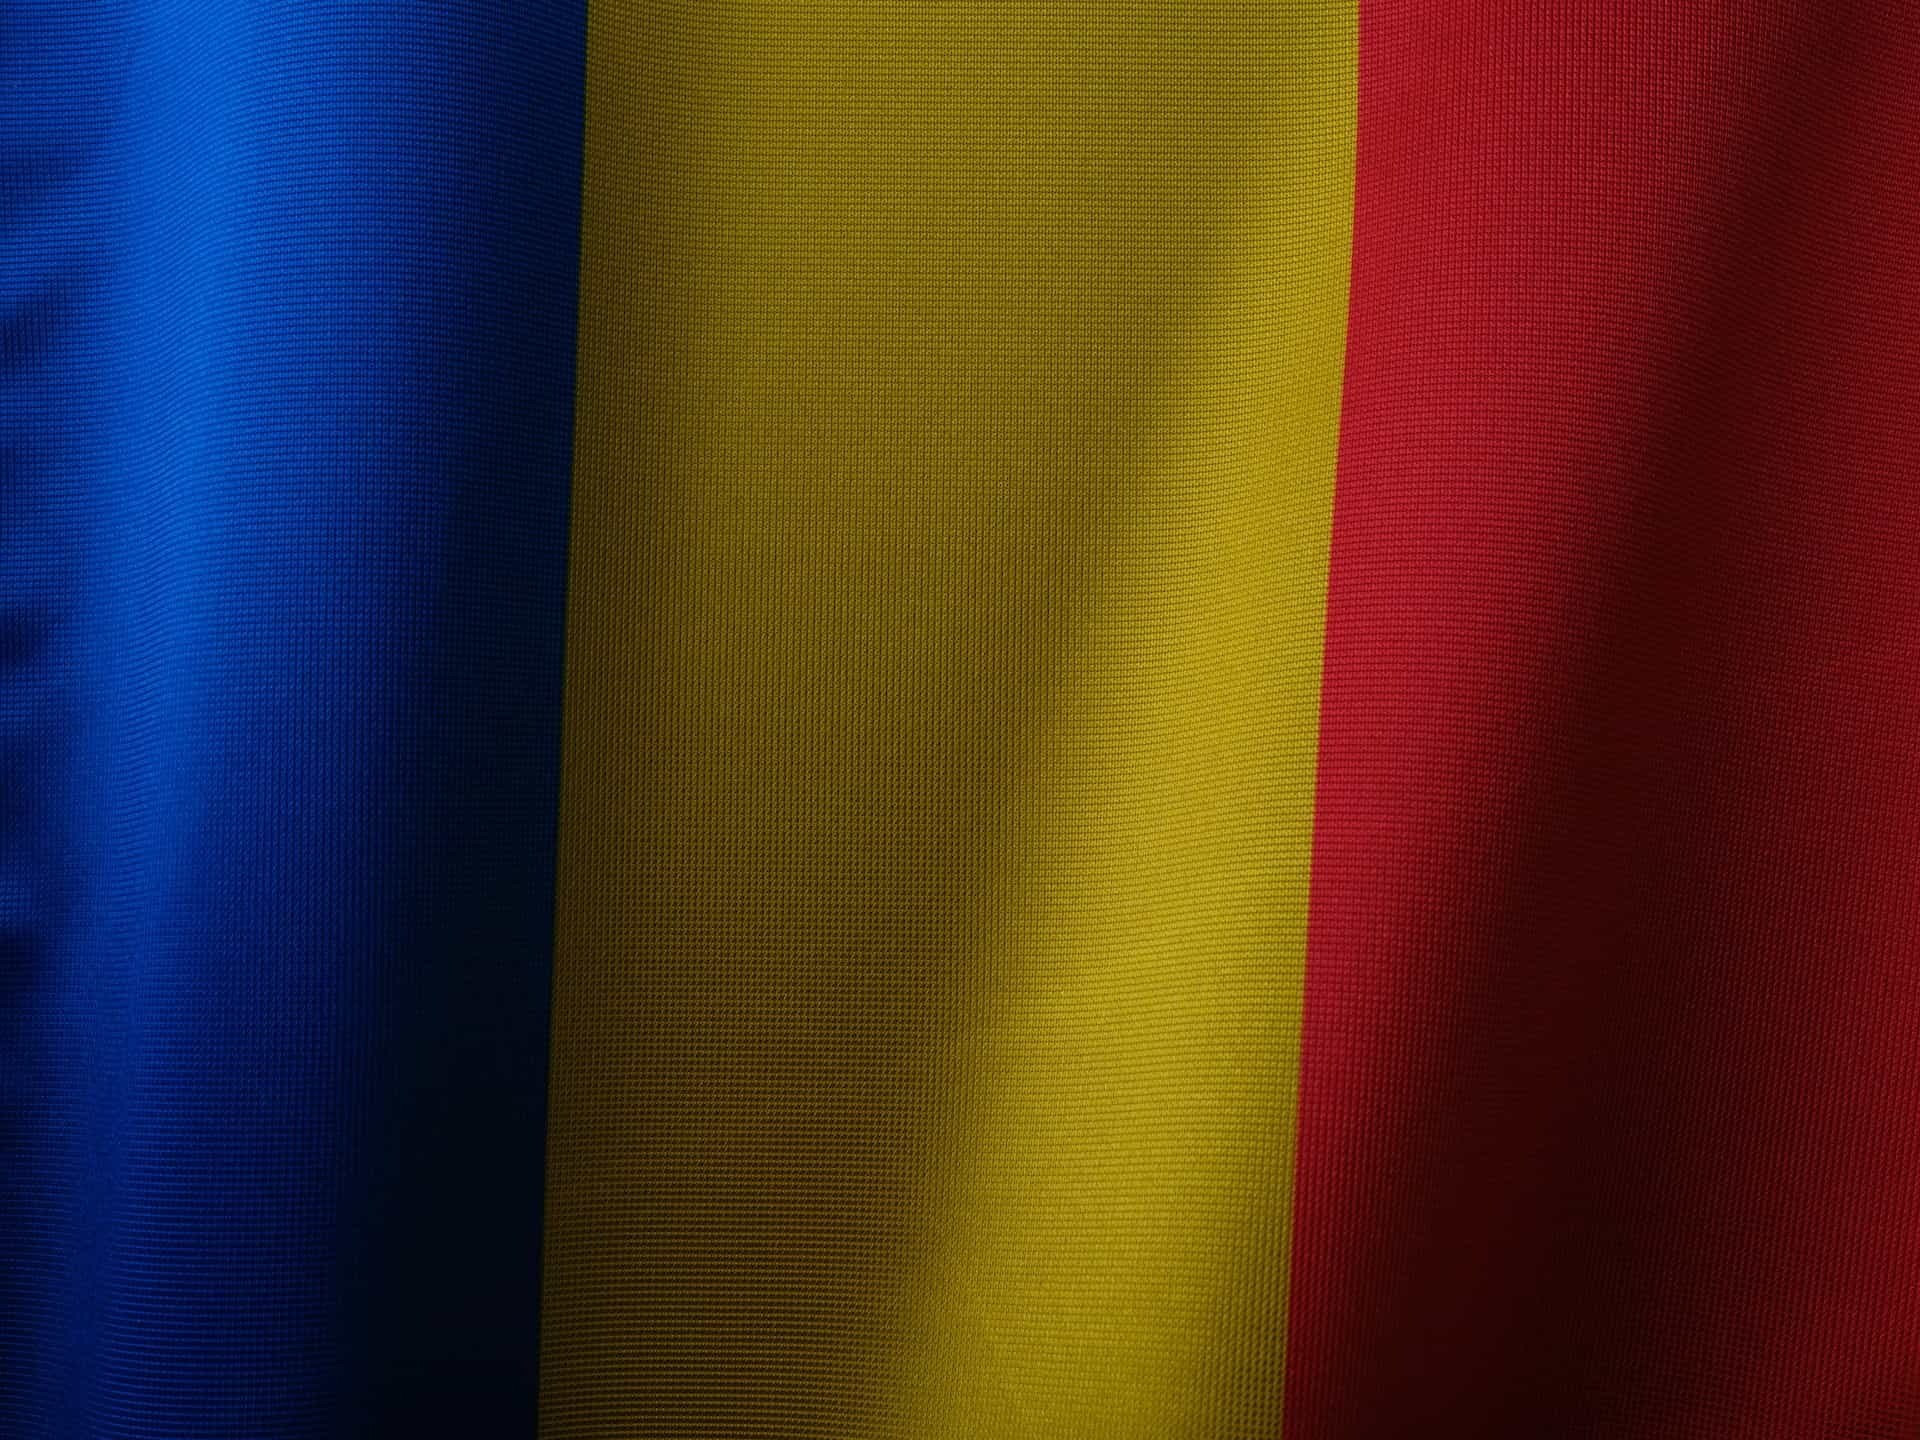 The image of a blue, yellow, and red flag.